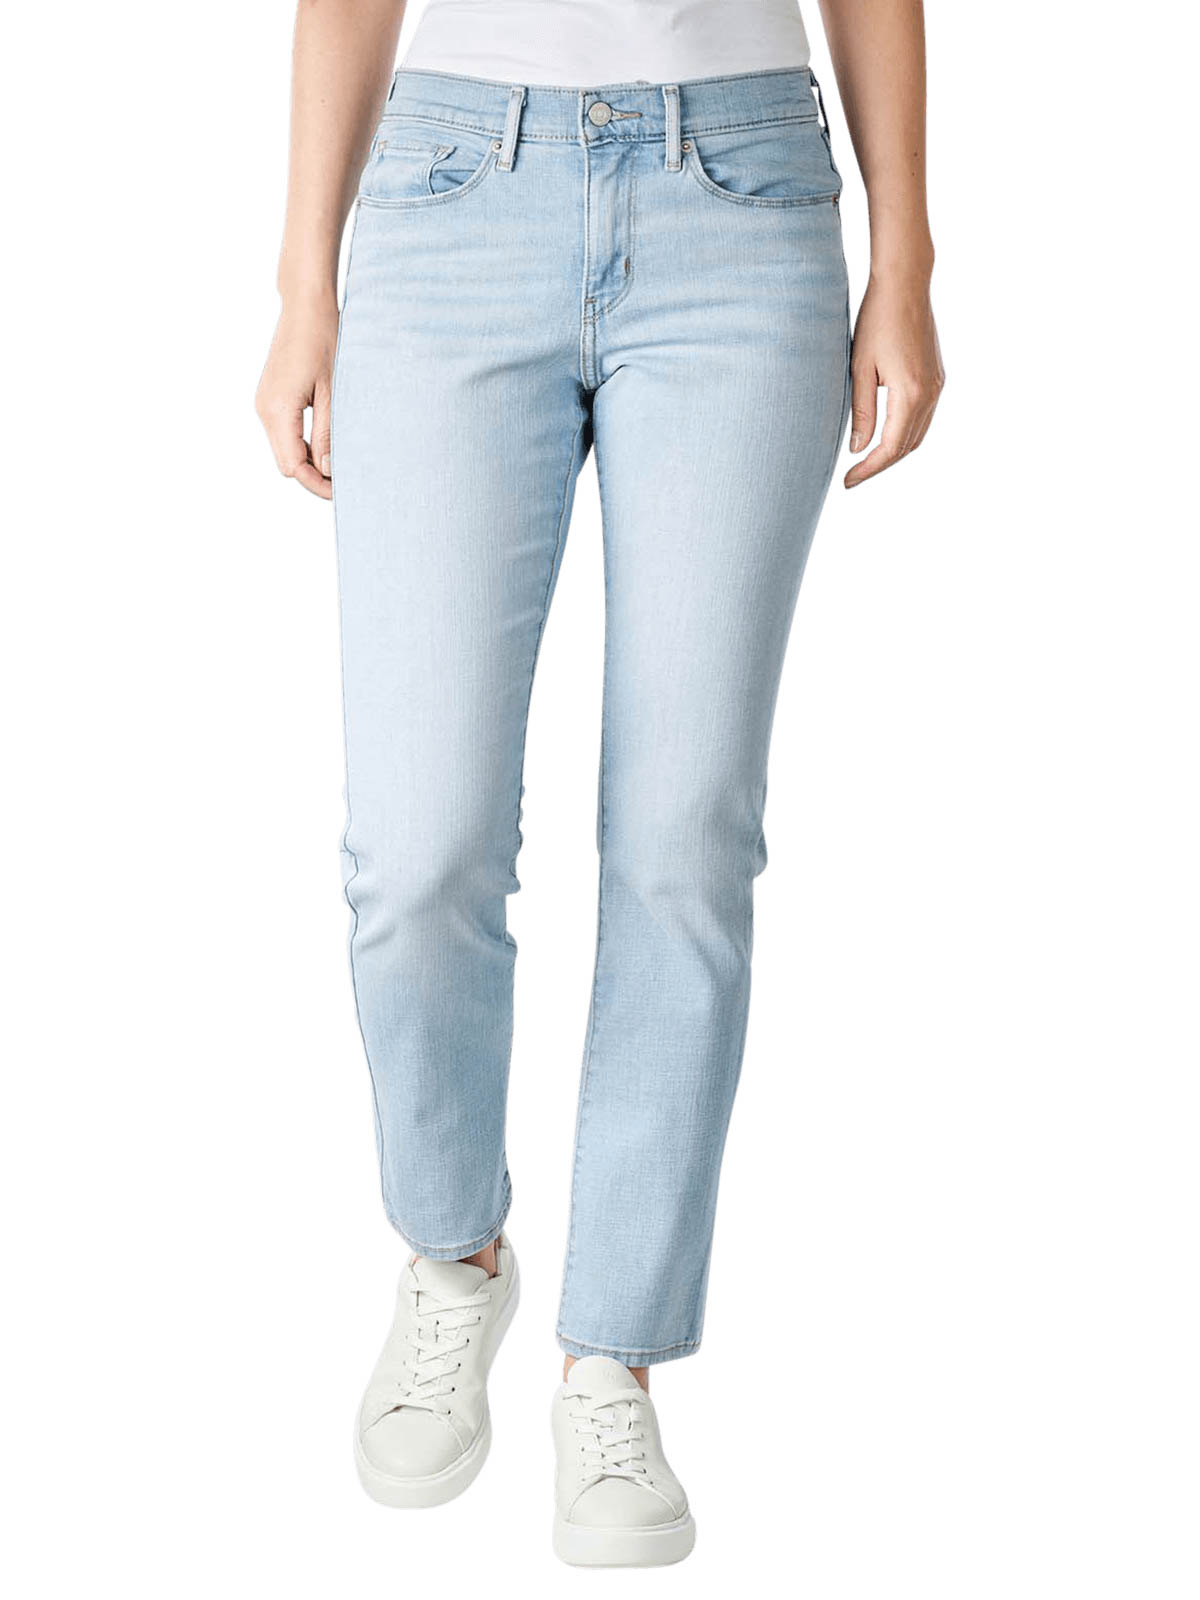 Levi's Classic Straight Jeans Slate Await Levi's Women's Jeans | Free  Shipping on  - SIMPLY LOOK GOOD